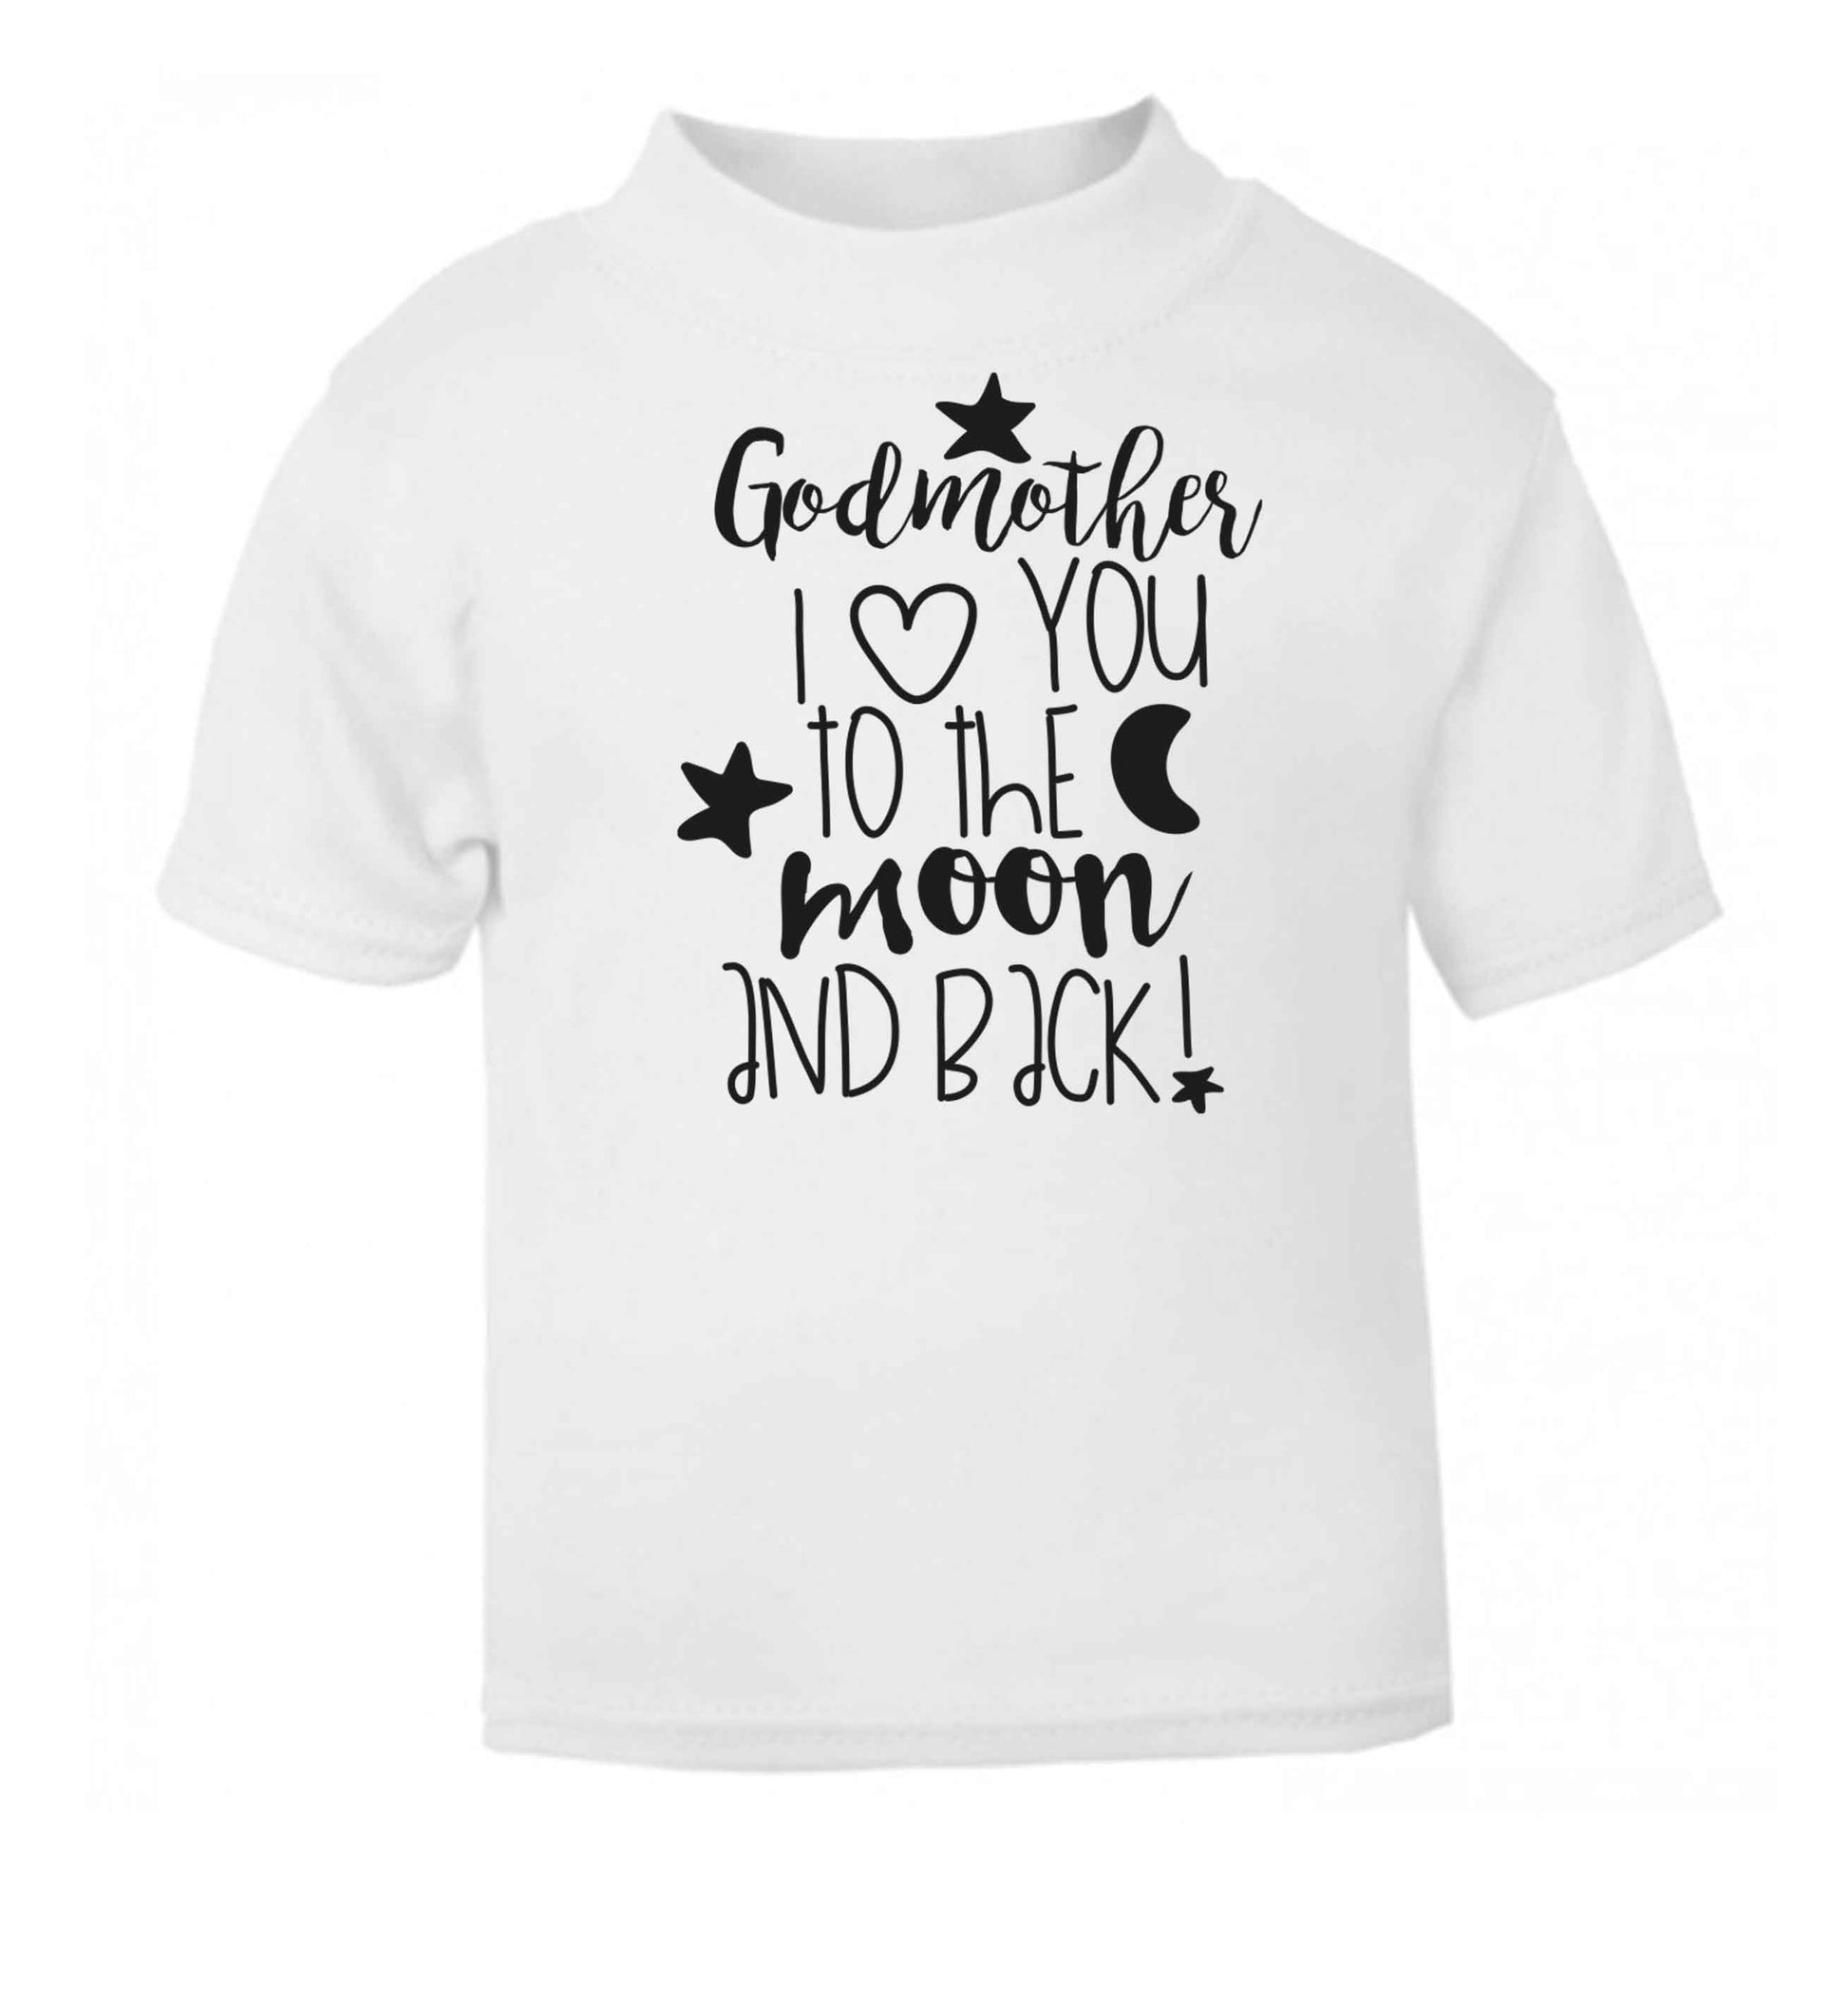 Godmother I love you to the moon and back white baby toddler Tshirt 2 Years